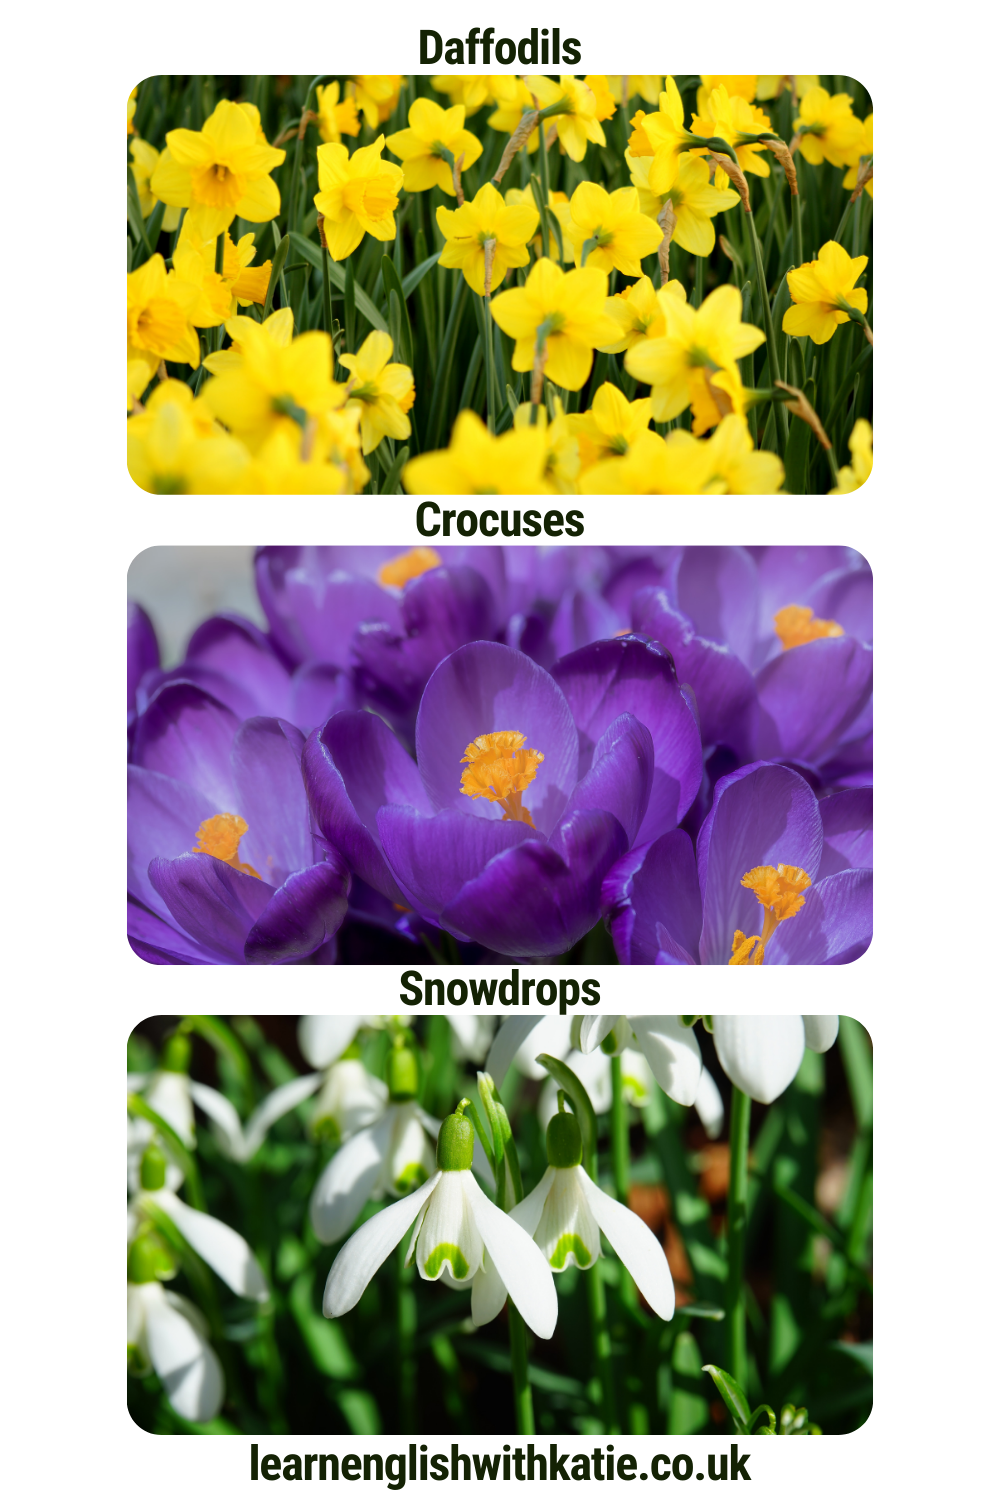 Pinterest pin showing pictures of daffodils, crocuses and snowdrops.